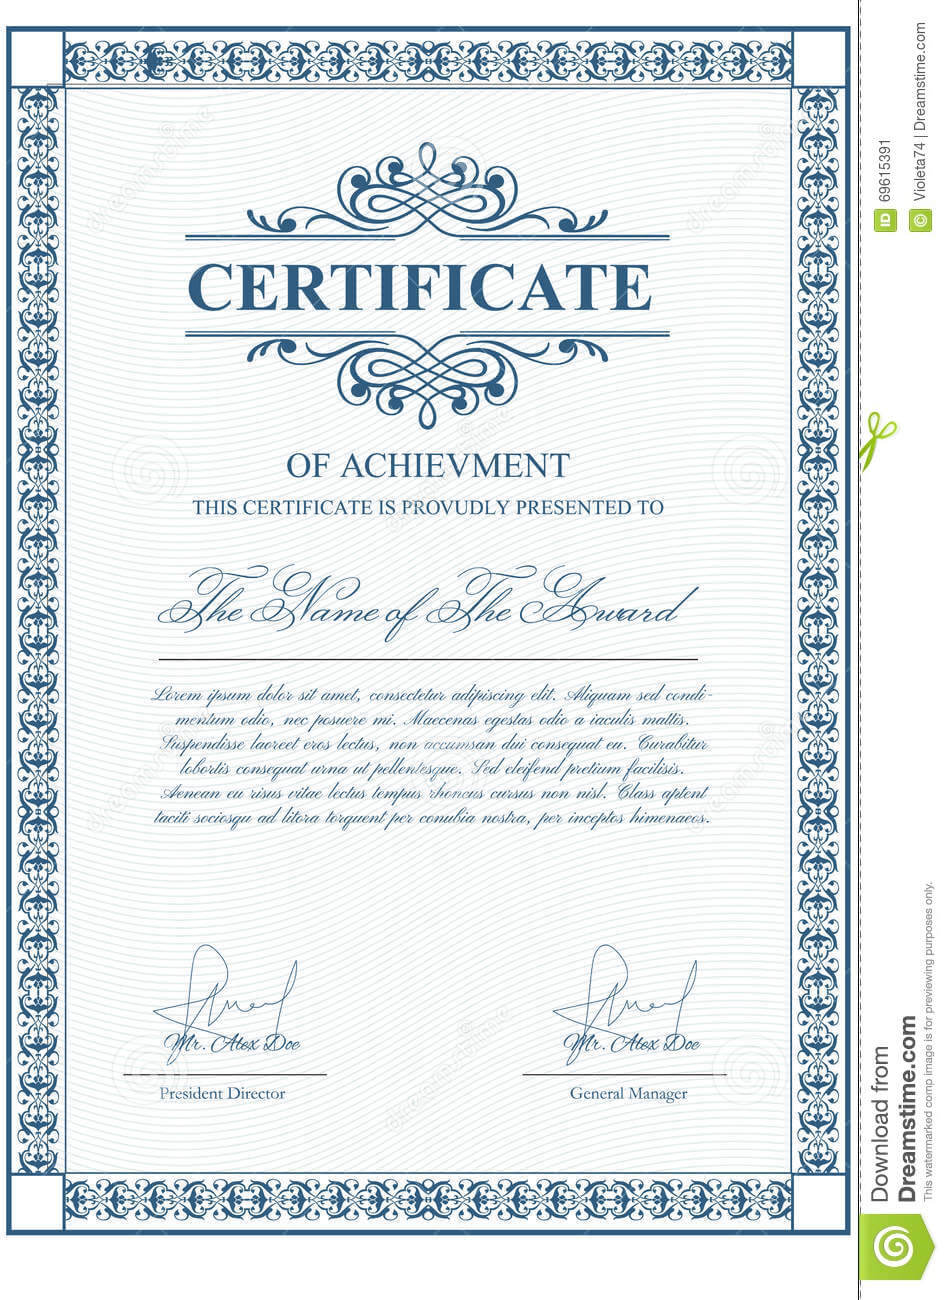 Certificate Template With Guilloche Elements. Stock Vector Pertaining To Validation Certificate Template